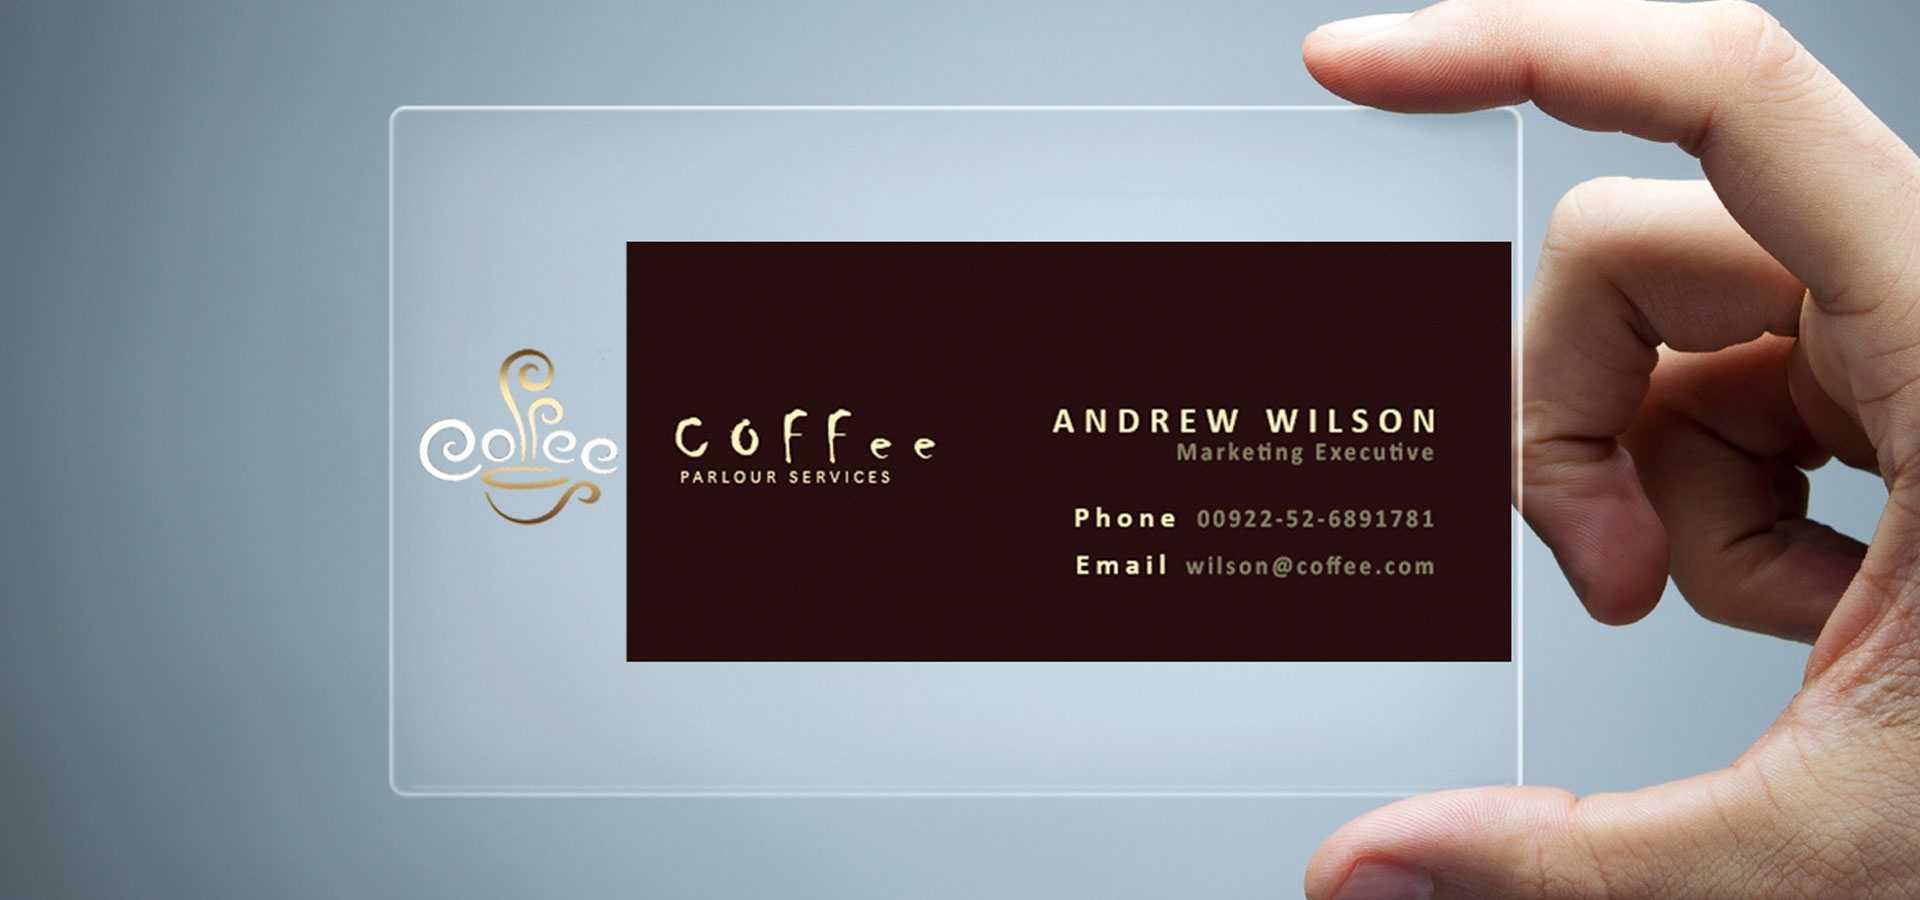 26+ Transparent Business Card Templates – Illustrator, Ms With Regard To Microsoft Templates For Business Cards